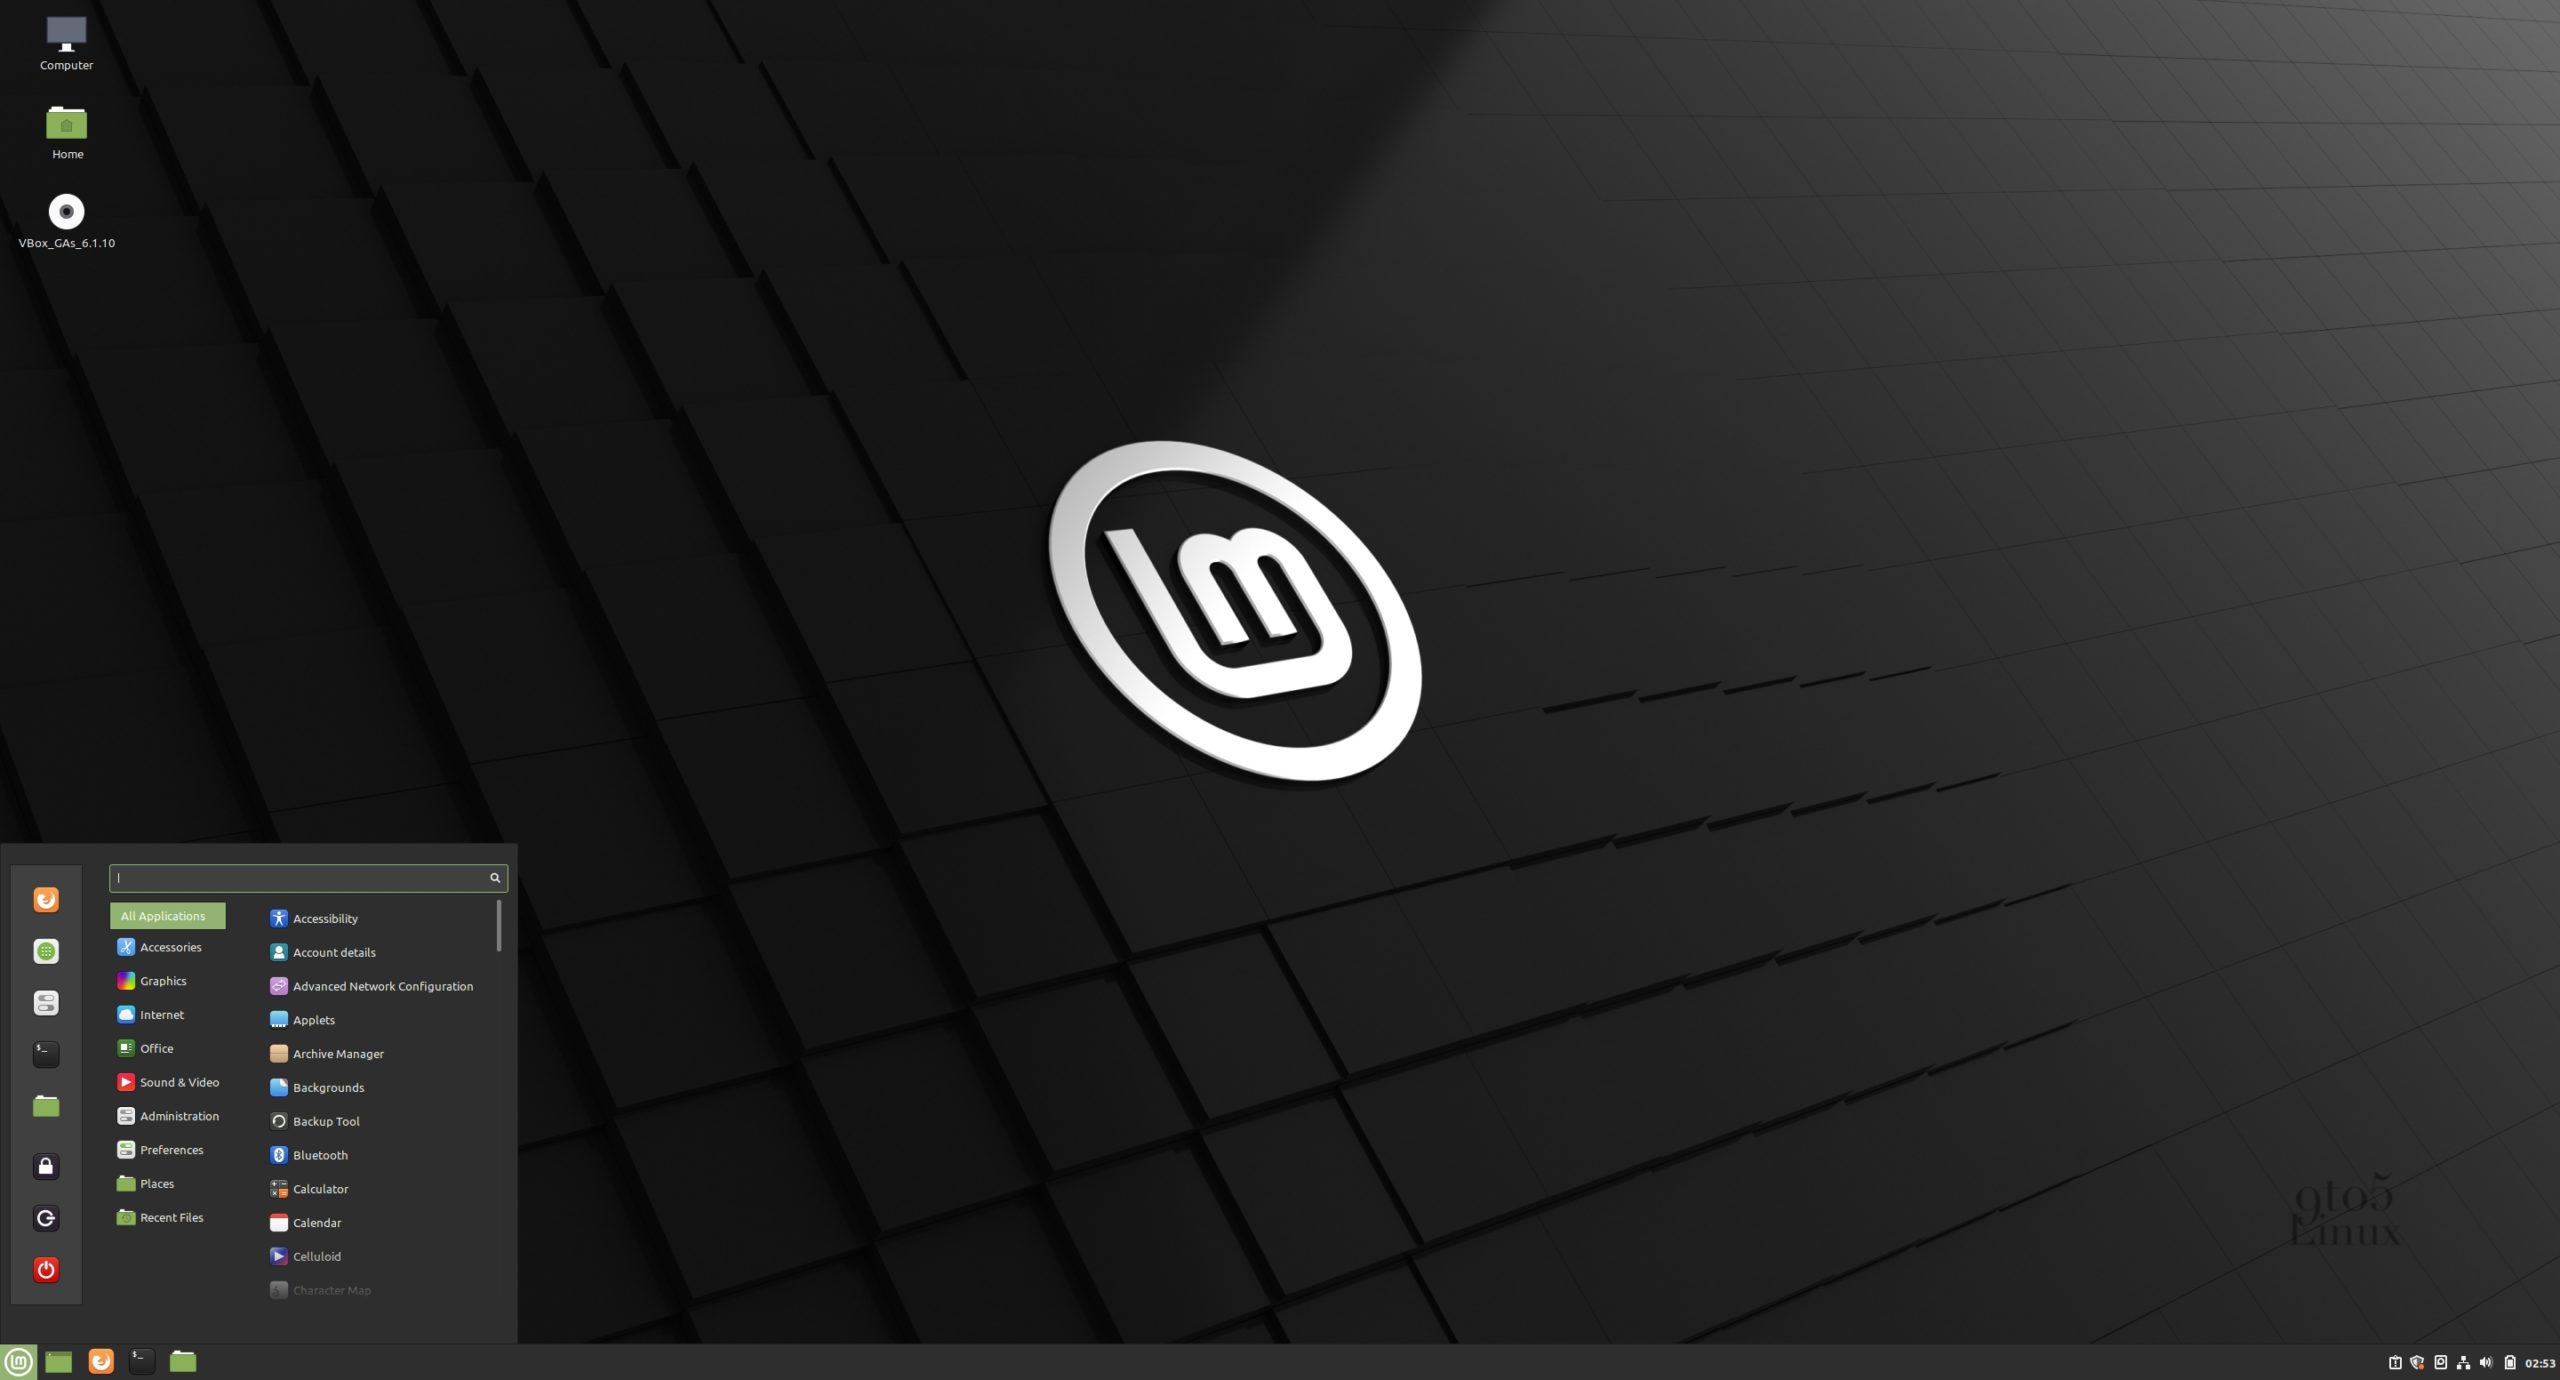 Linux Mint 20.1 “Ulyssa” Is Coming Just Before Christmas